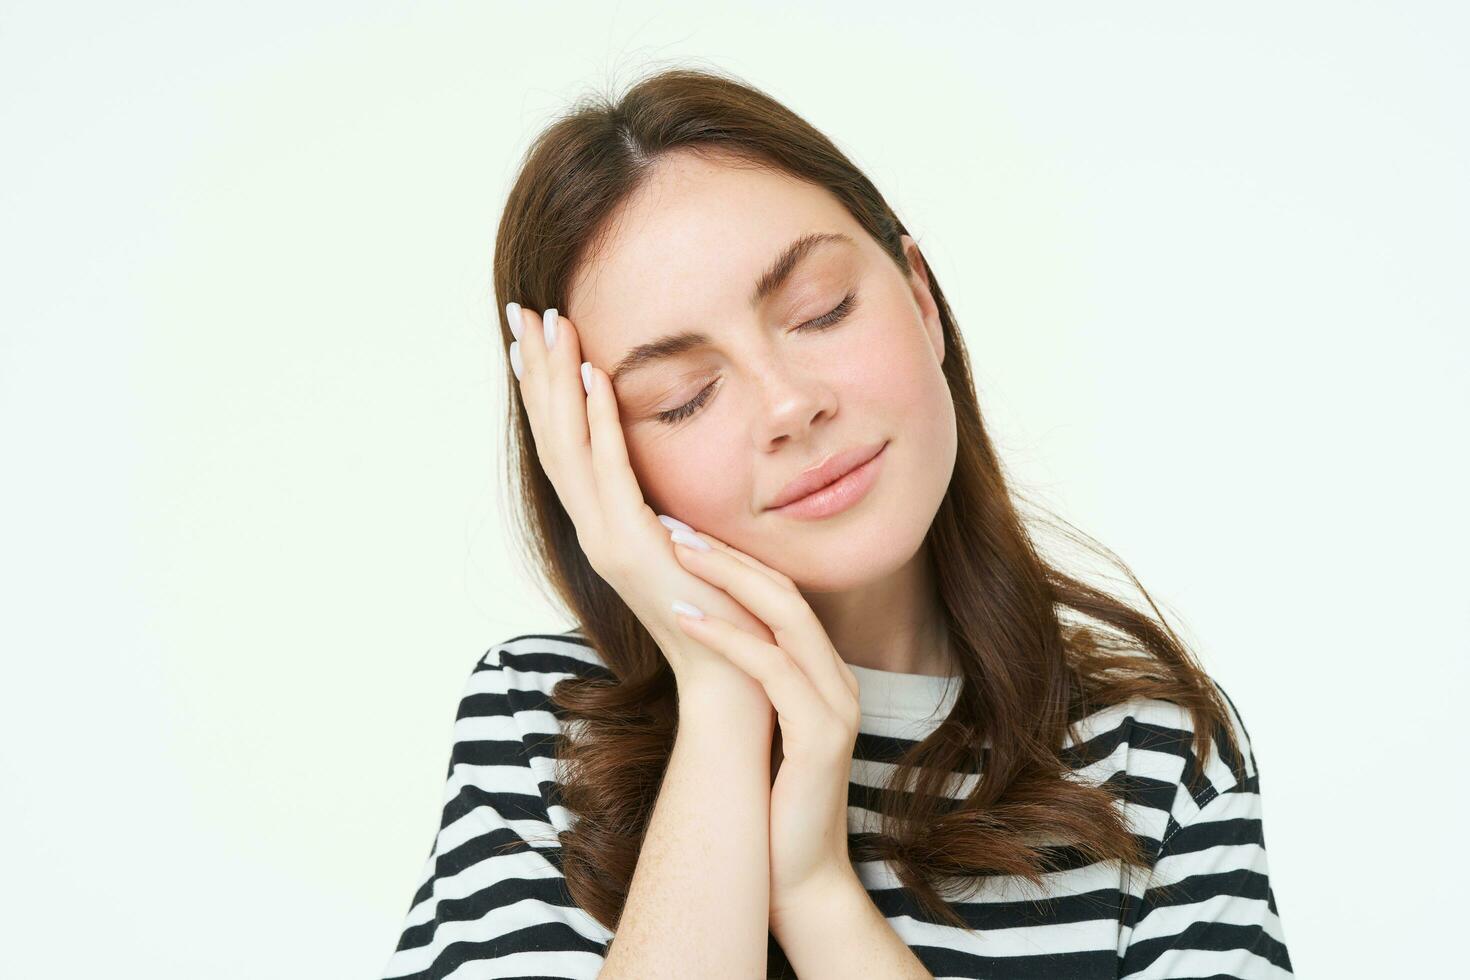 Close up portrait of tender, smiling young woman, closes her eyes and touches her palm, sleeping on her hand, isolated on white background photo